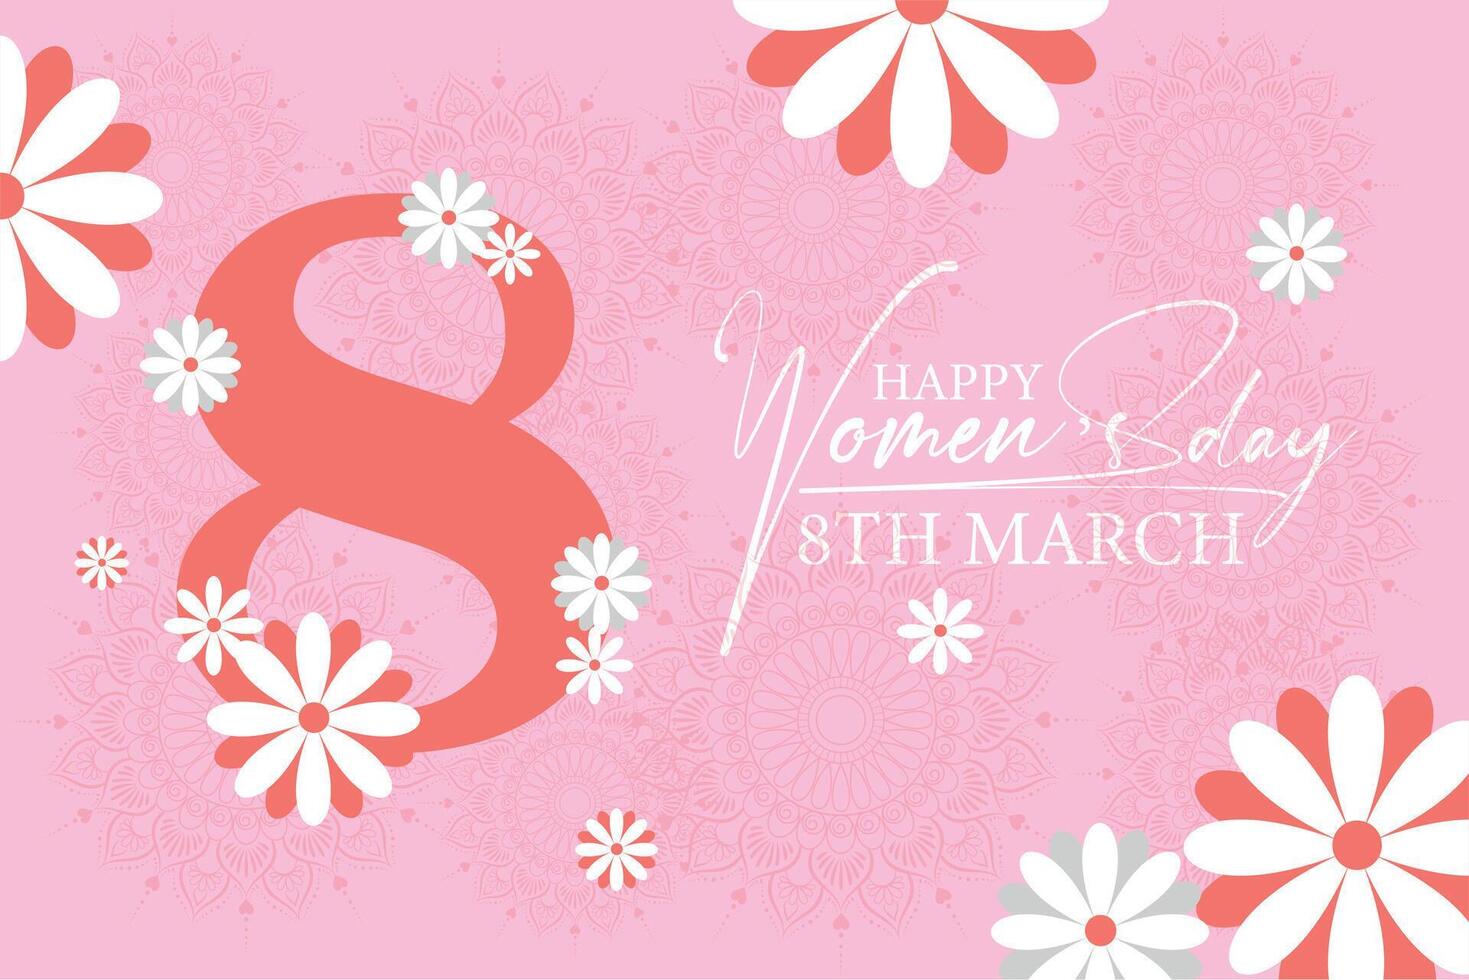 8 March, women's Day greeting card and Happy Women's Day banner design, placard, card, and poster design template with text inscription and standard color,  International Women's Day celebration, vector